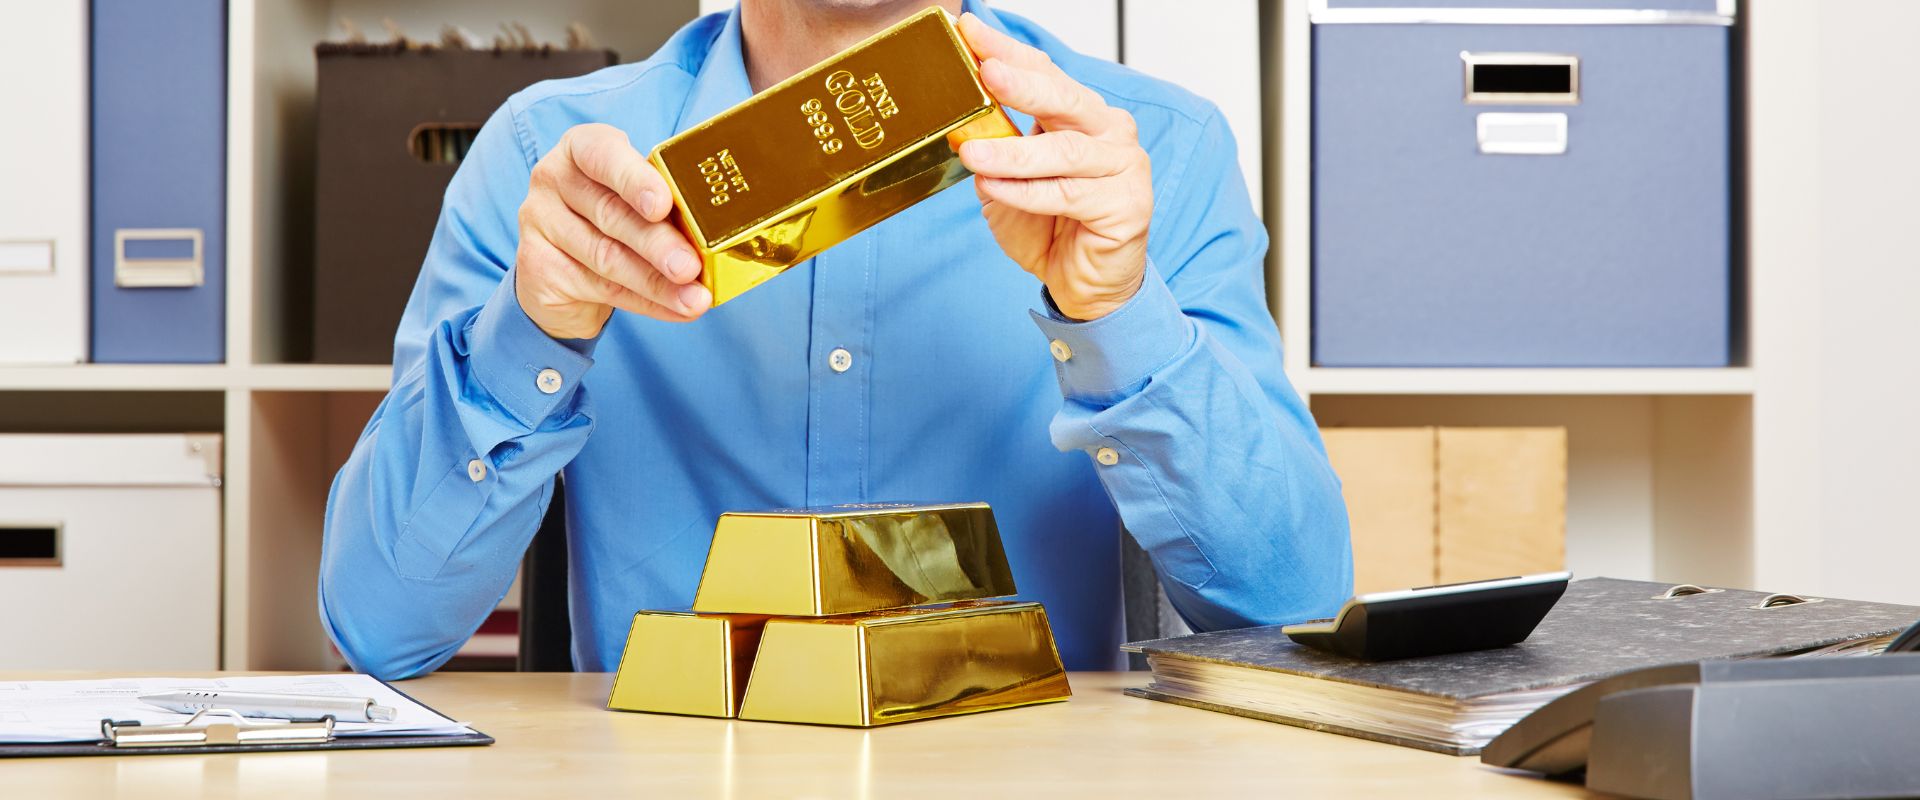 investor holding gold bar in office